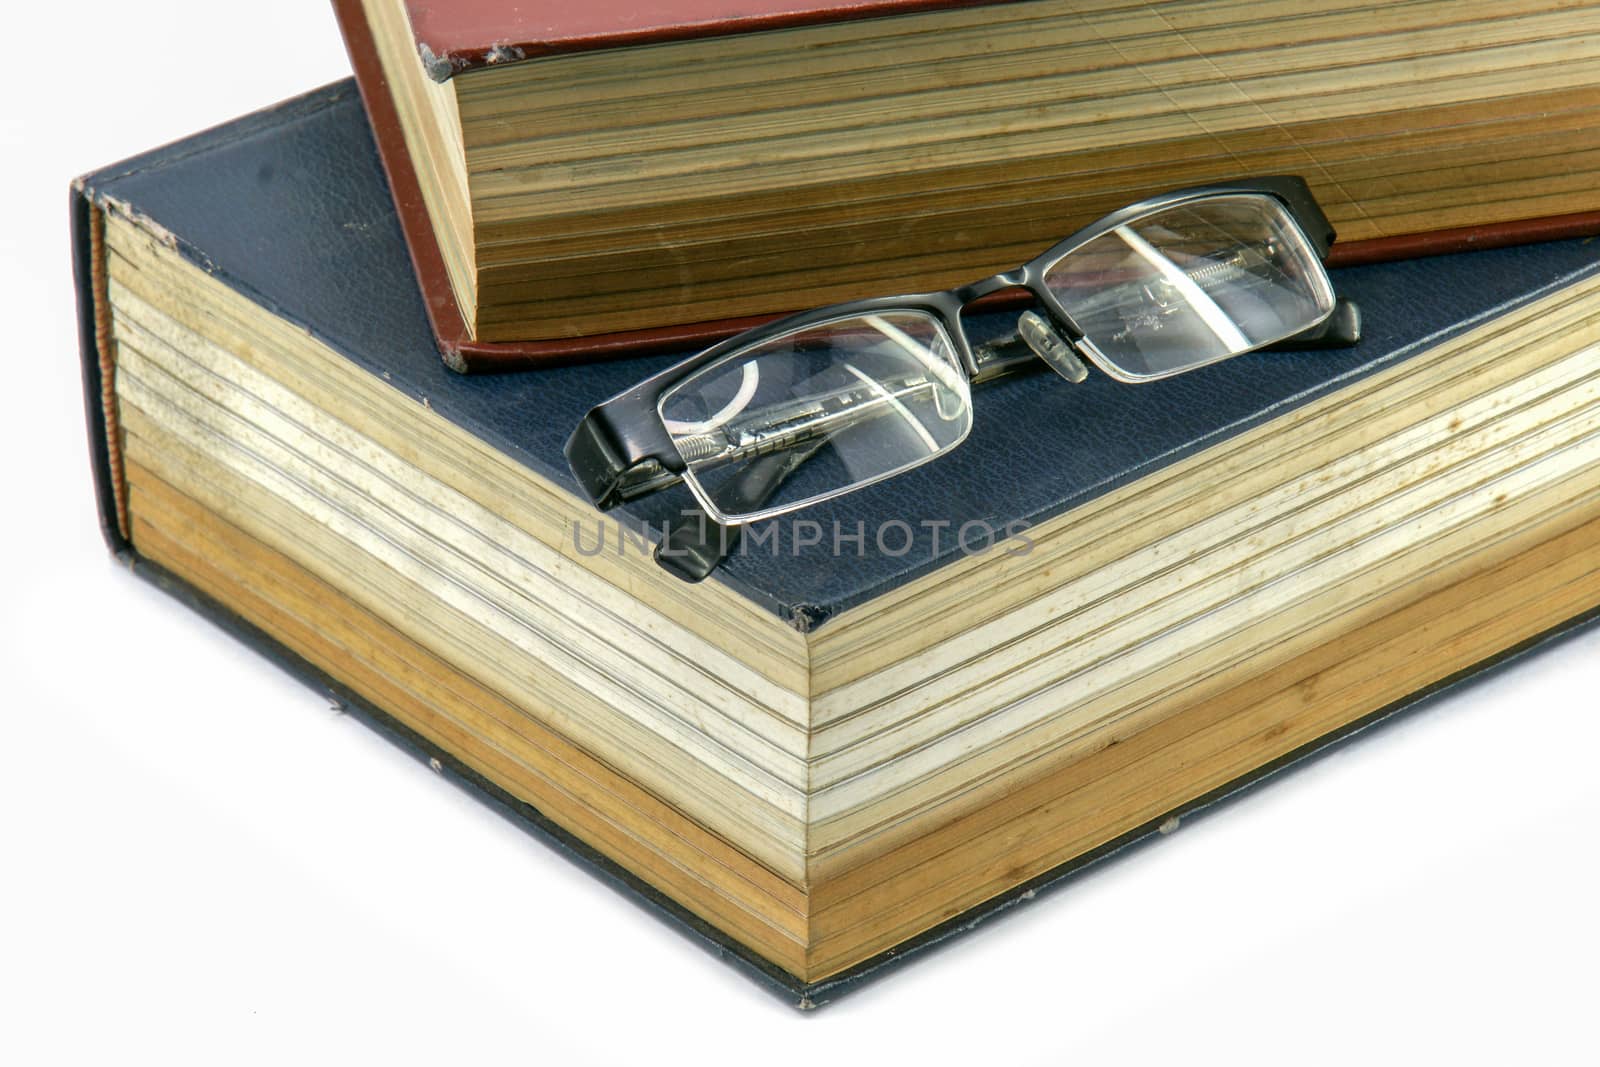 Old text books or bible with eyeglasses on them